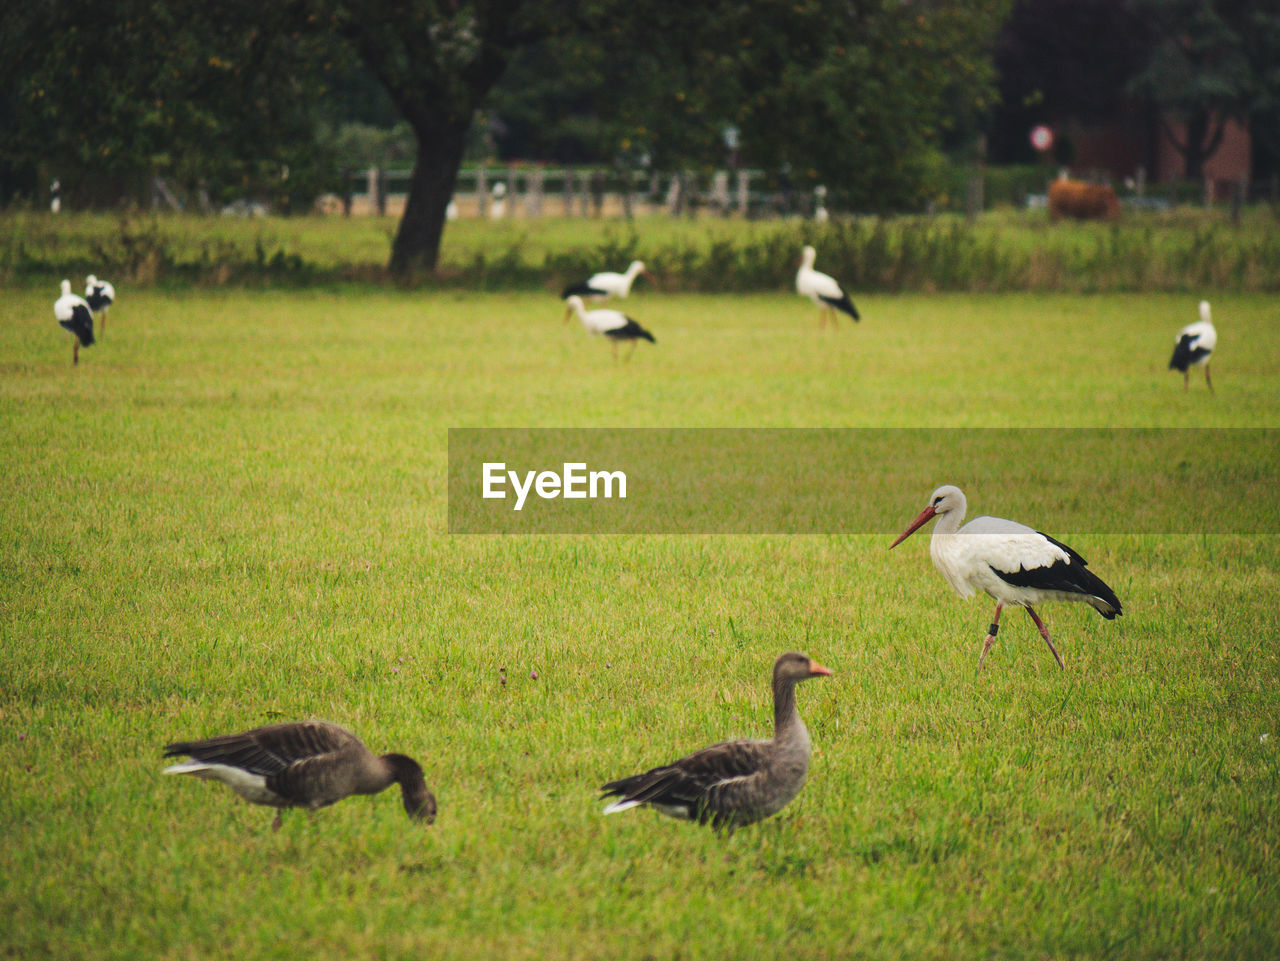 Geese and storks on grassy field